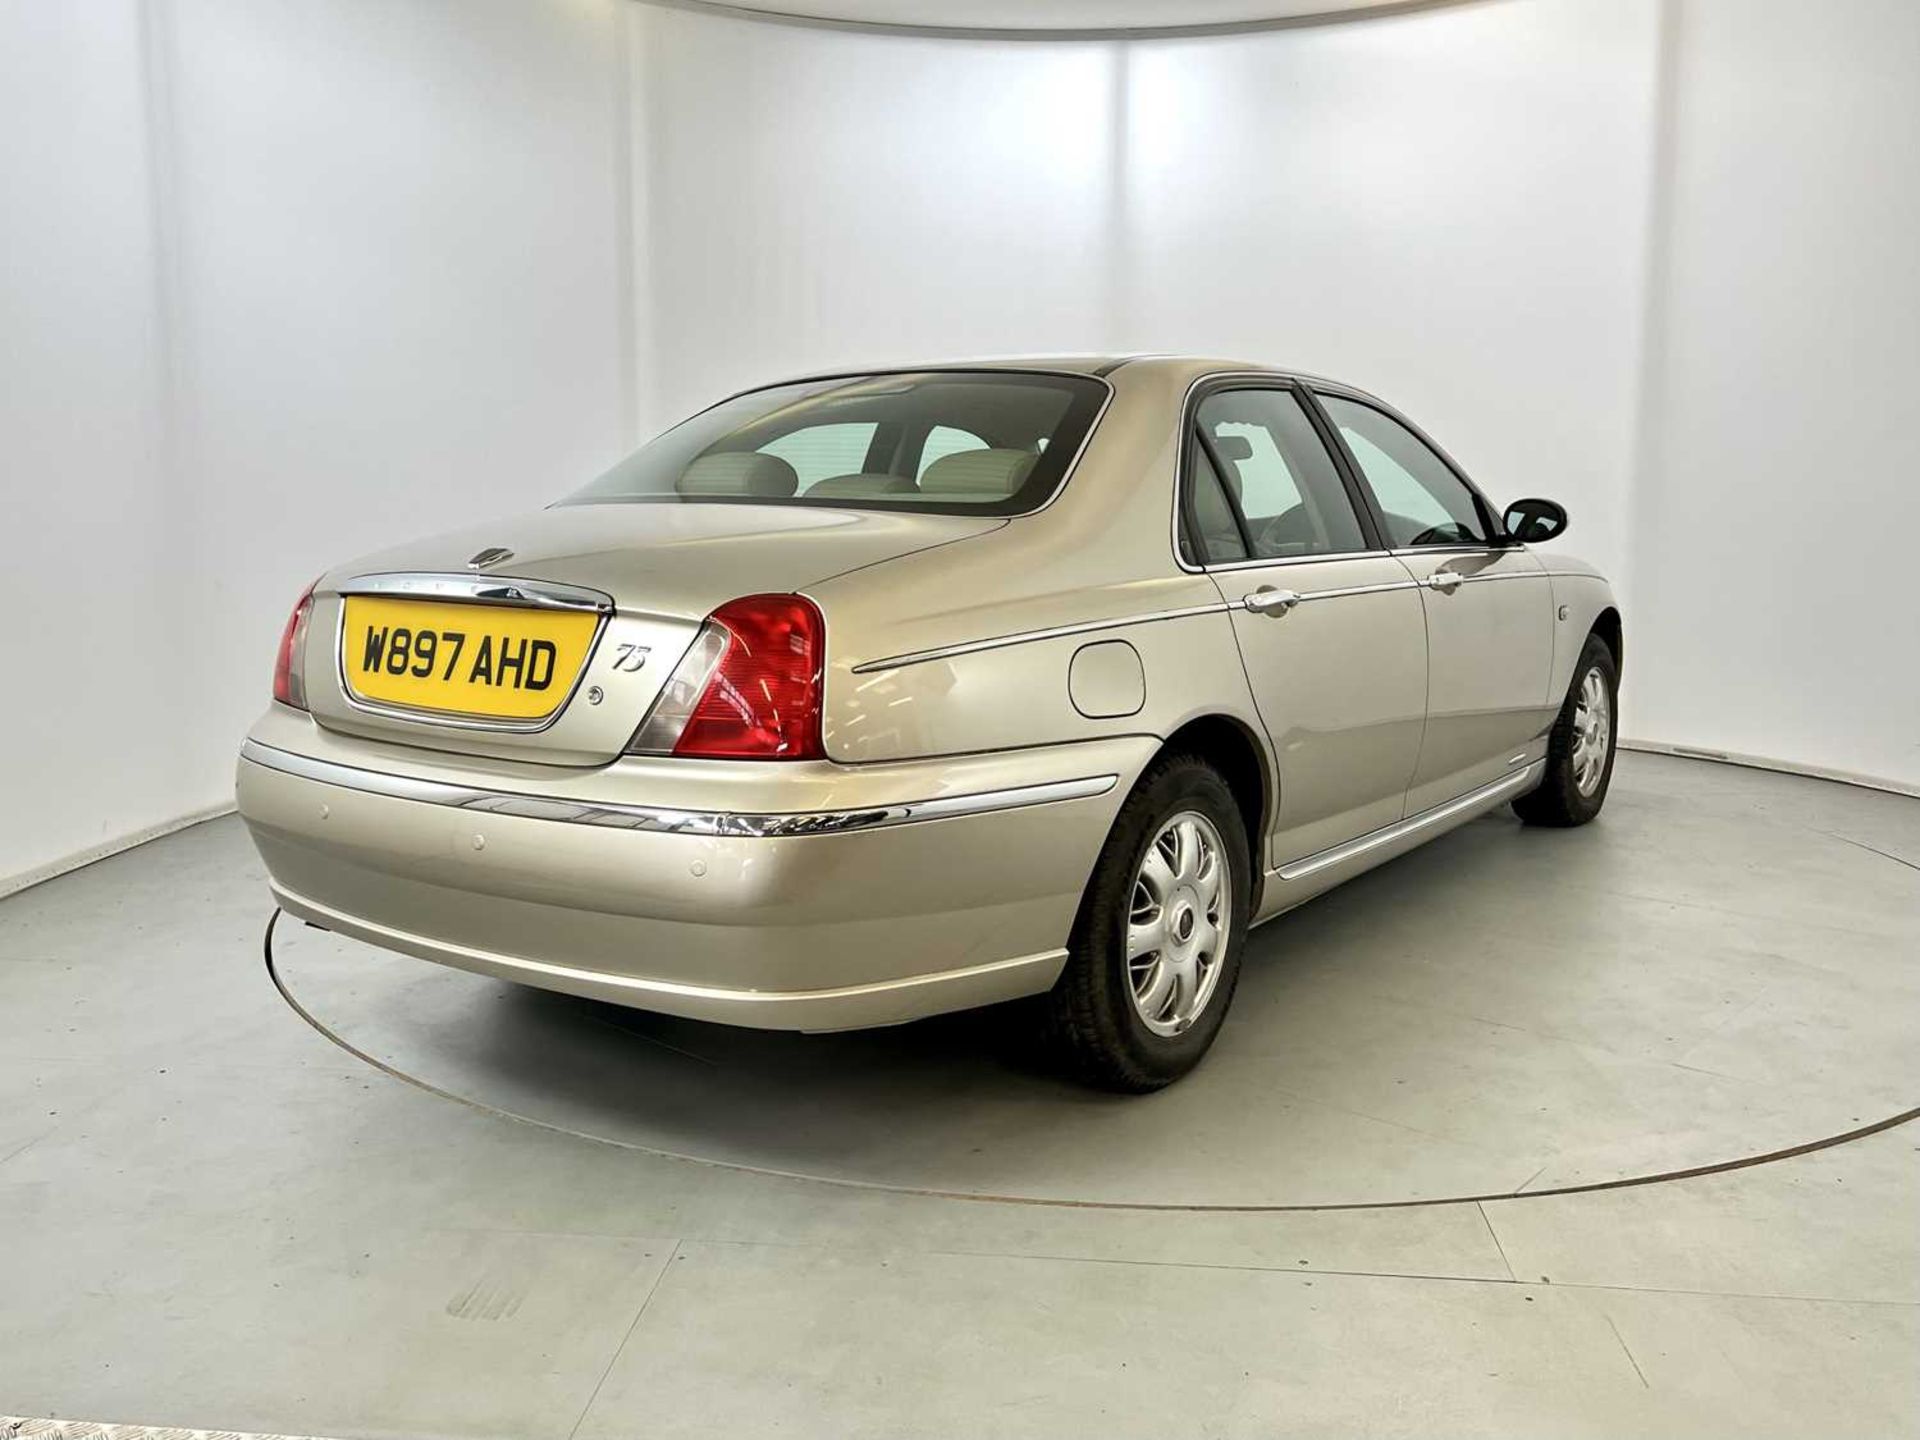 2000 Rover 75 Connoisseur - Image 9 of 34